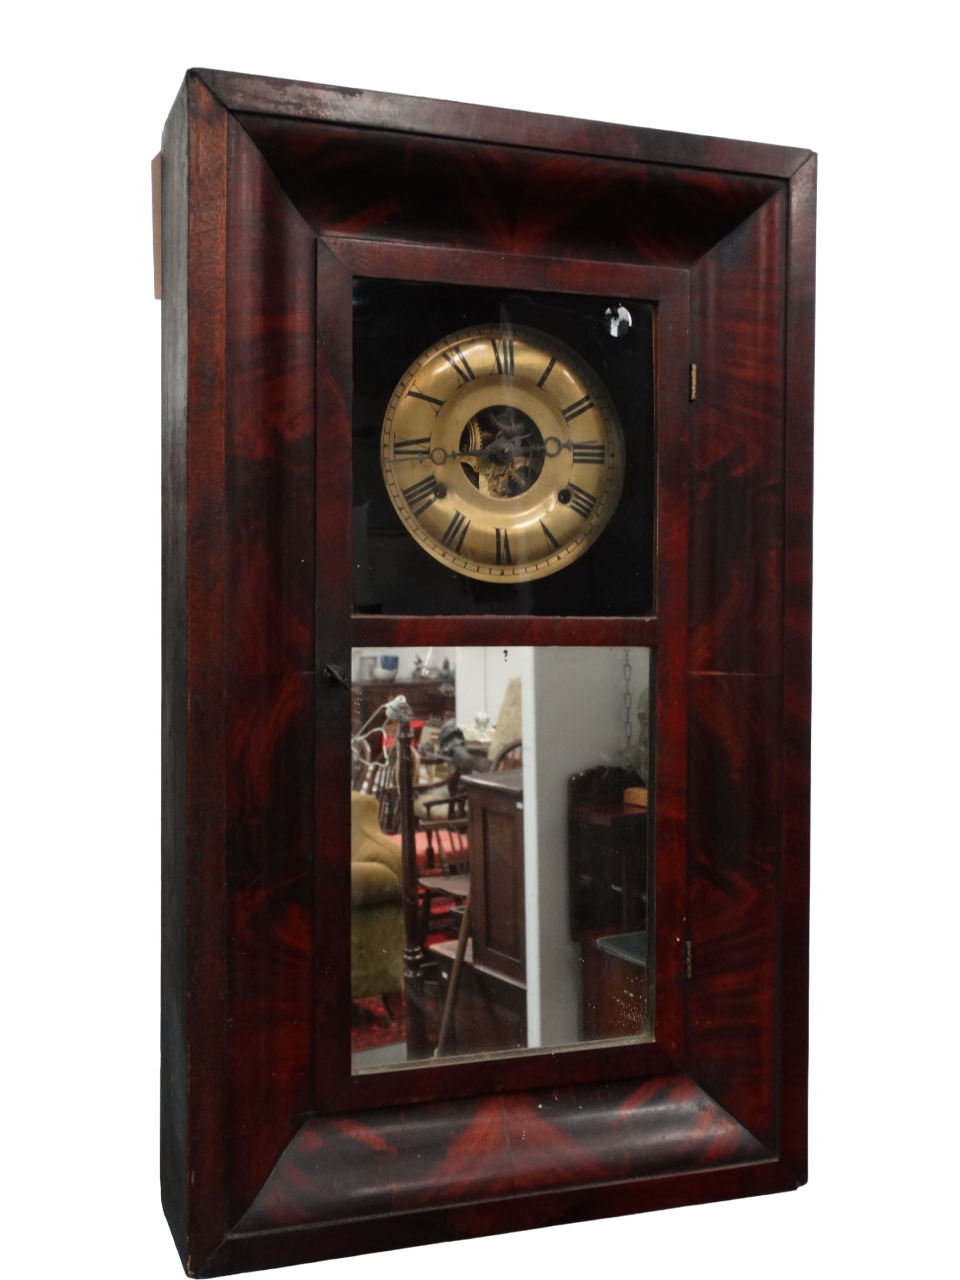 A late 19th century American mahogany cased wall clock - the brassed dial set out in Roman